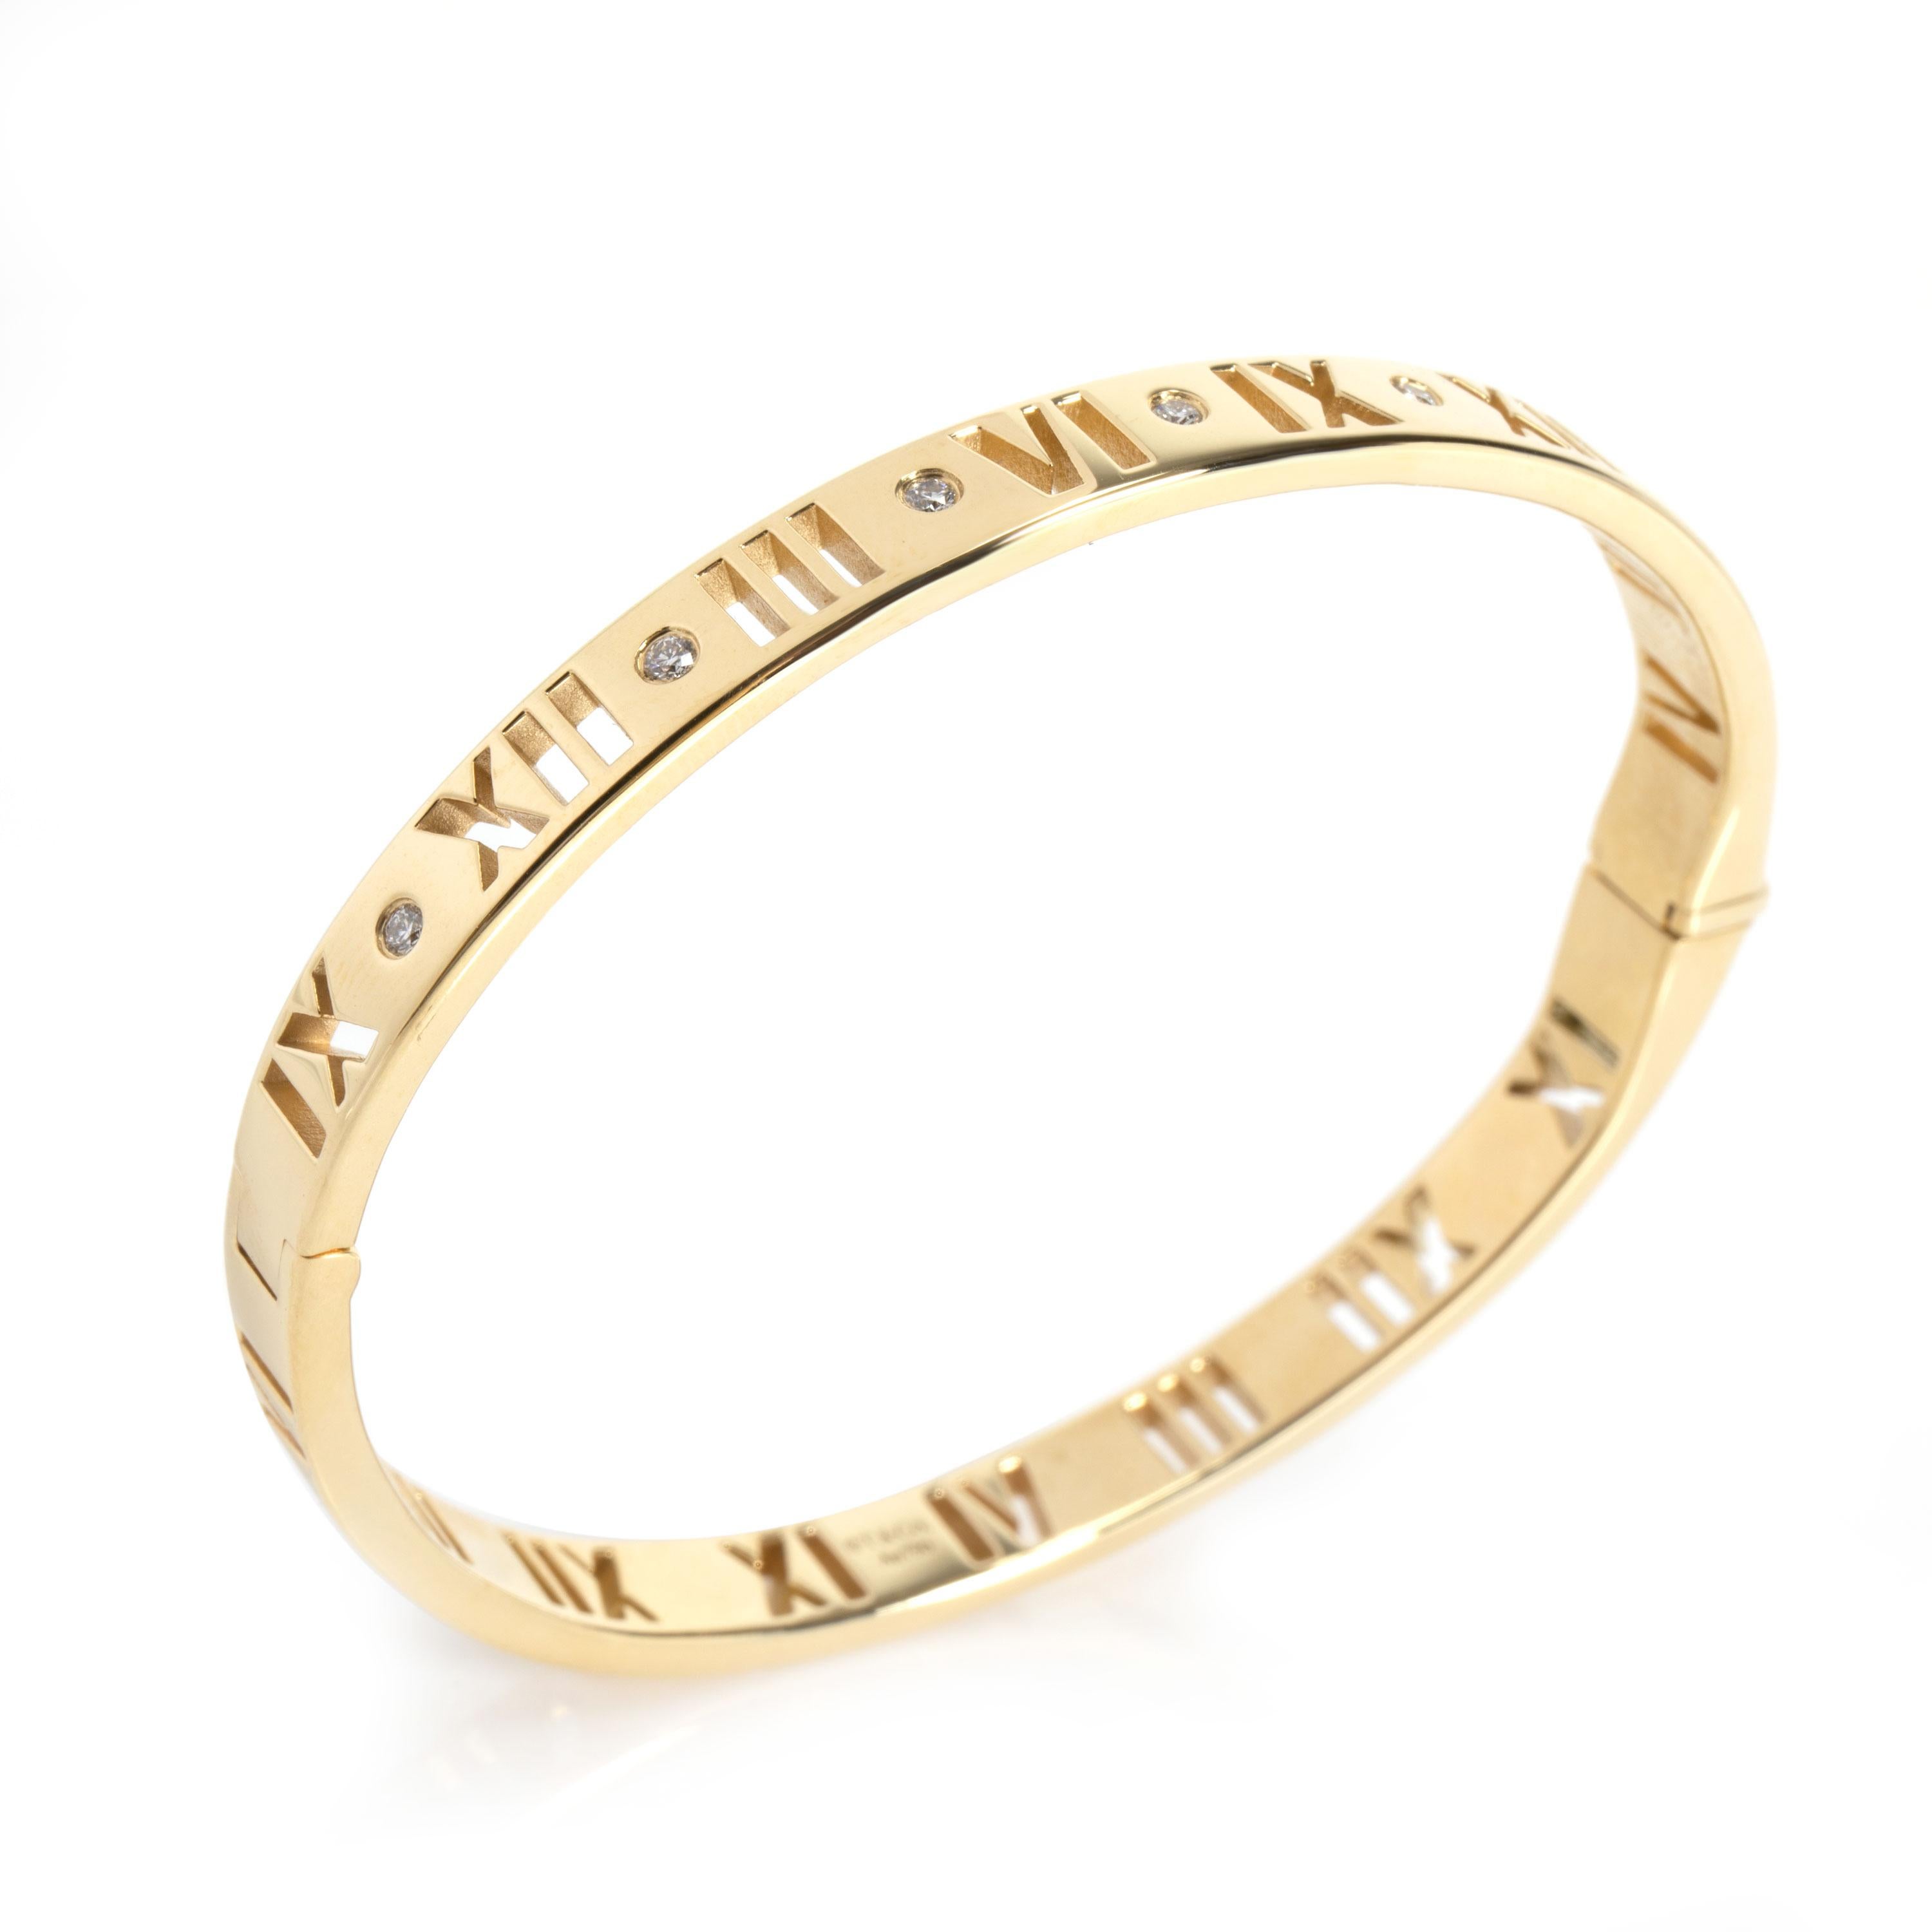 Tiffany & Co. Atlas Pierced Hinged Diamond Bracelet in 18K Yellow Gold

PRIMARY DETAILS

SKU: 105519

Tiffany & Co. Atlas Pierced Hinged Diamond Bracelet in 18K Yellow Gold
Condition Description: Retails for 7200 USD. In excellent condition and